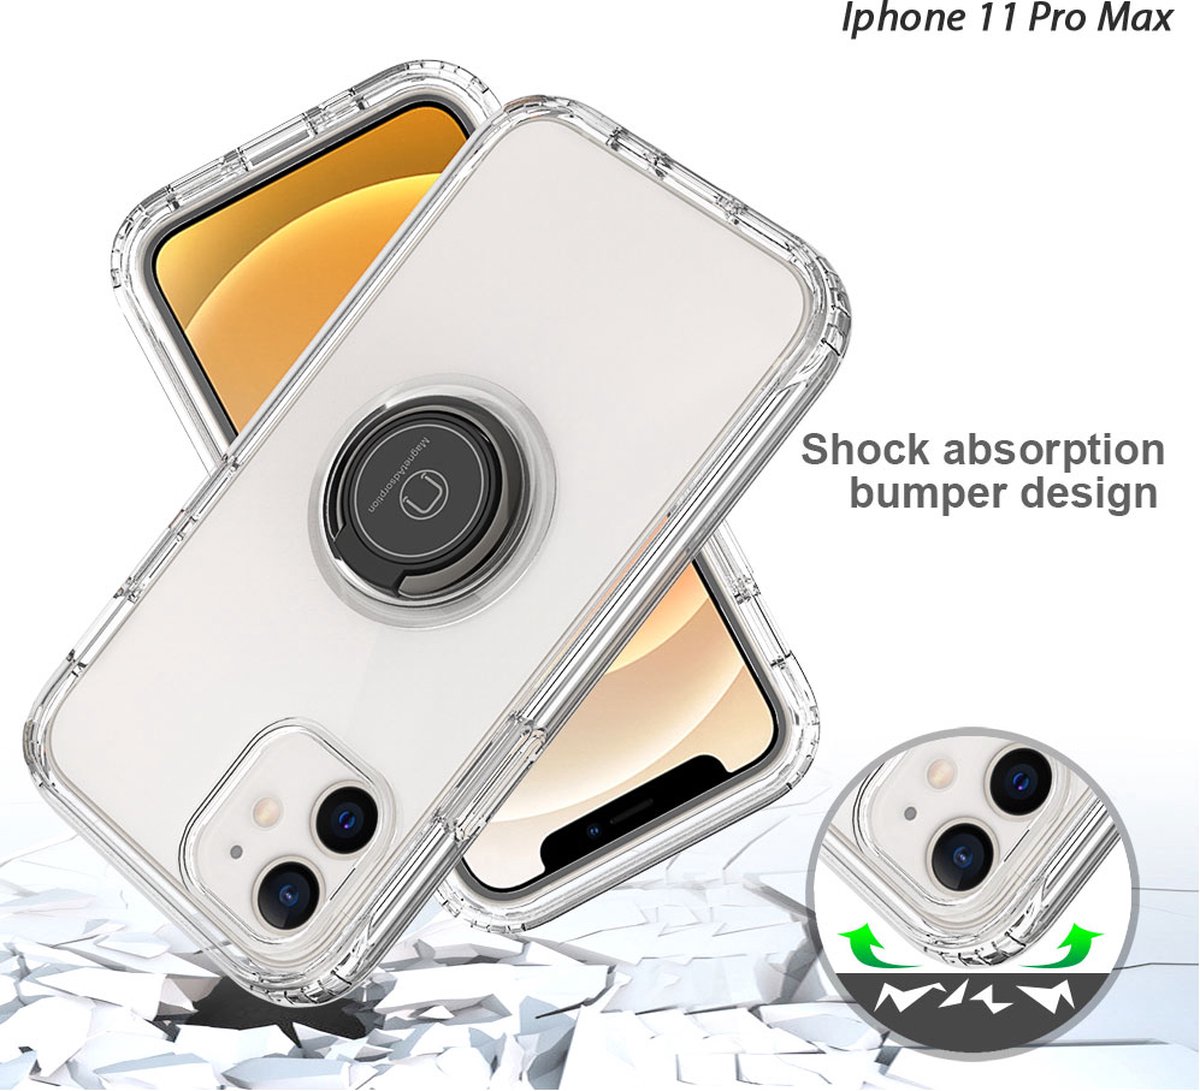 Space Ring Transparant iPhone 11 Pro Max hoesje, Gratis 2 iPhone 11 Pro Max Screenprotector, hoesje iPhone 11 Pro Max, iphone 11 Pro Max bumper hoesje, iphone 11 Pro Max bumper case, iphone 11 Pro Max Backcover hoesje